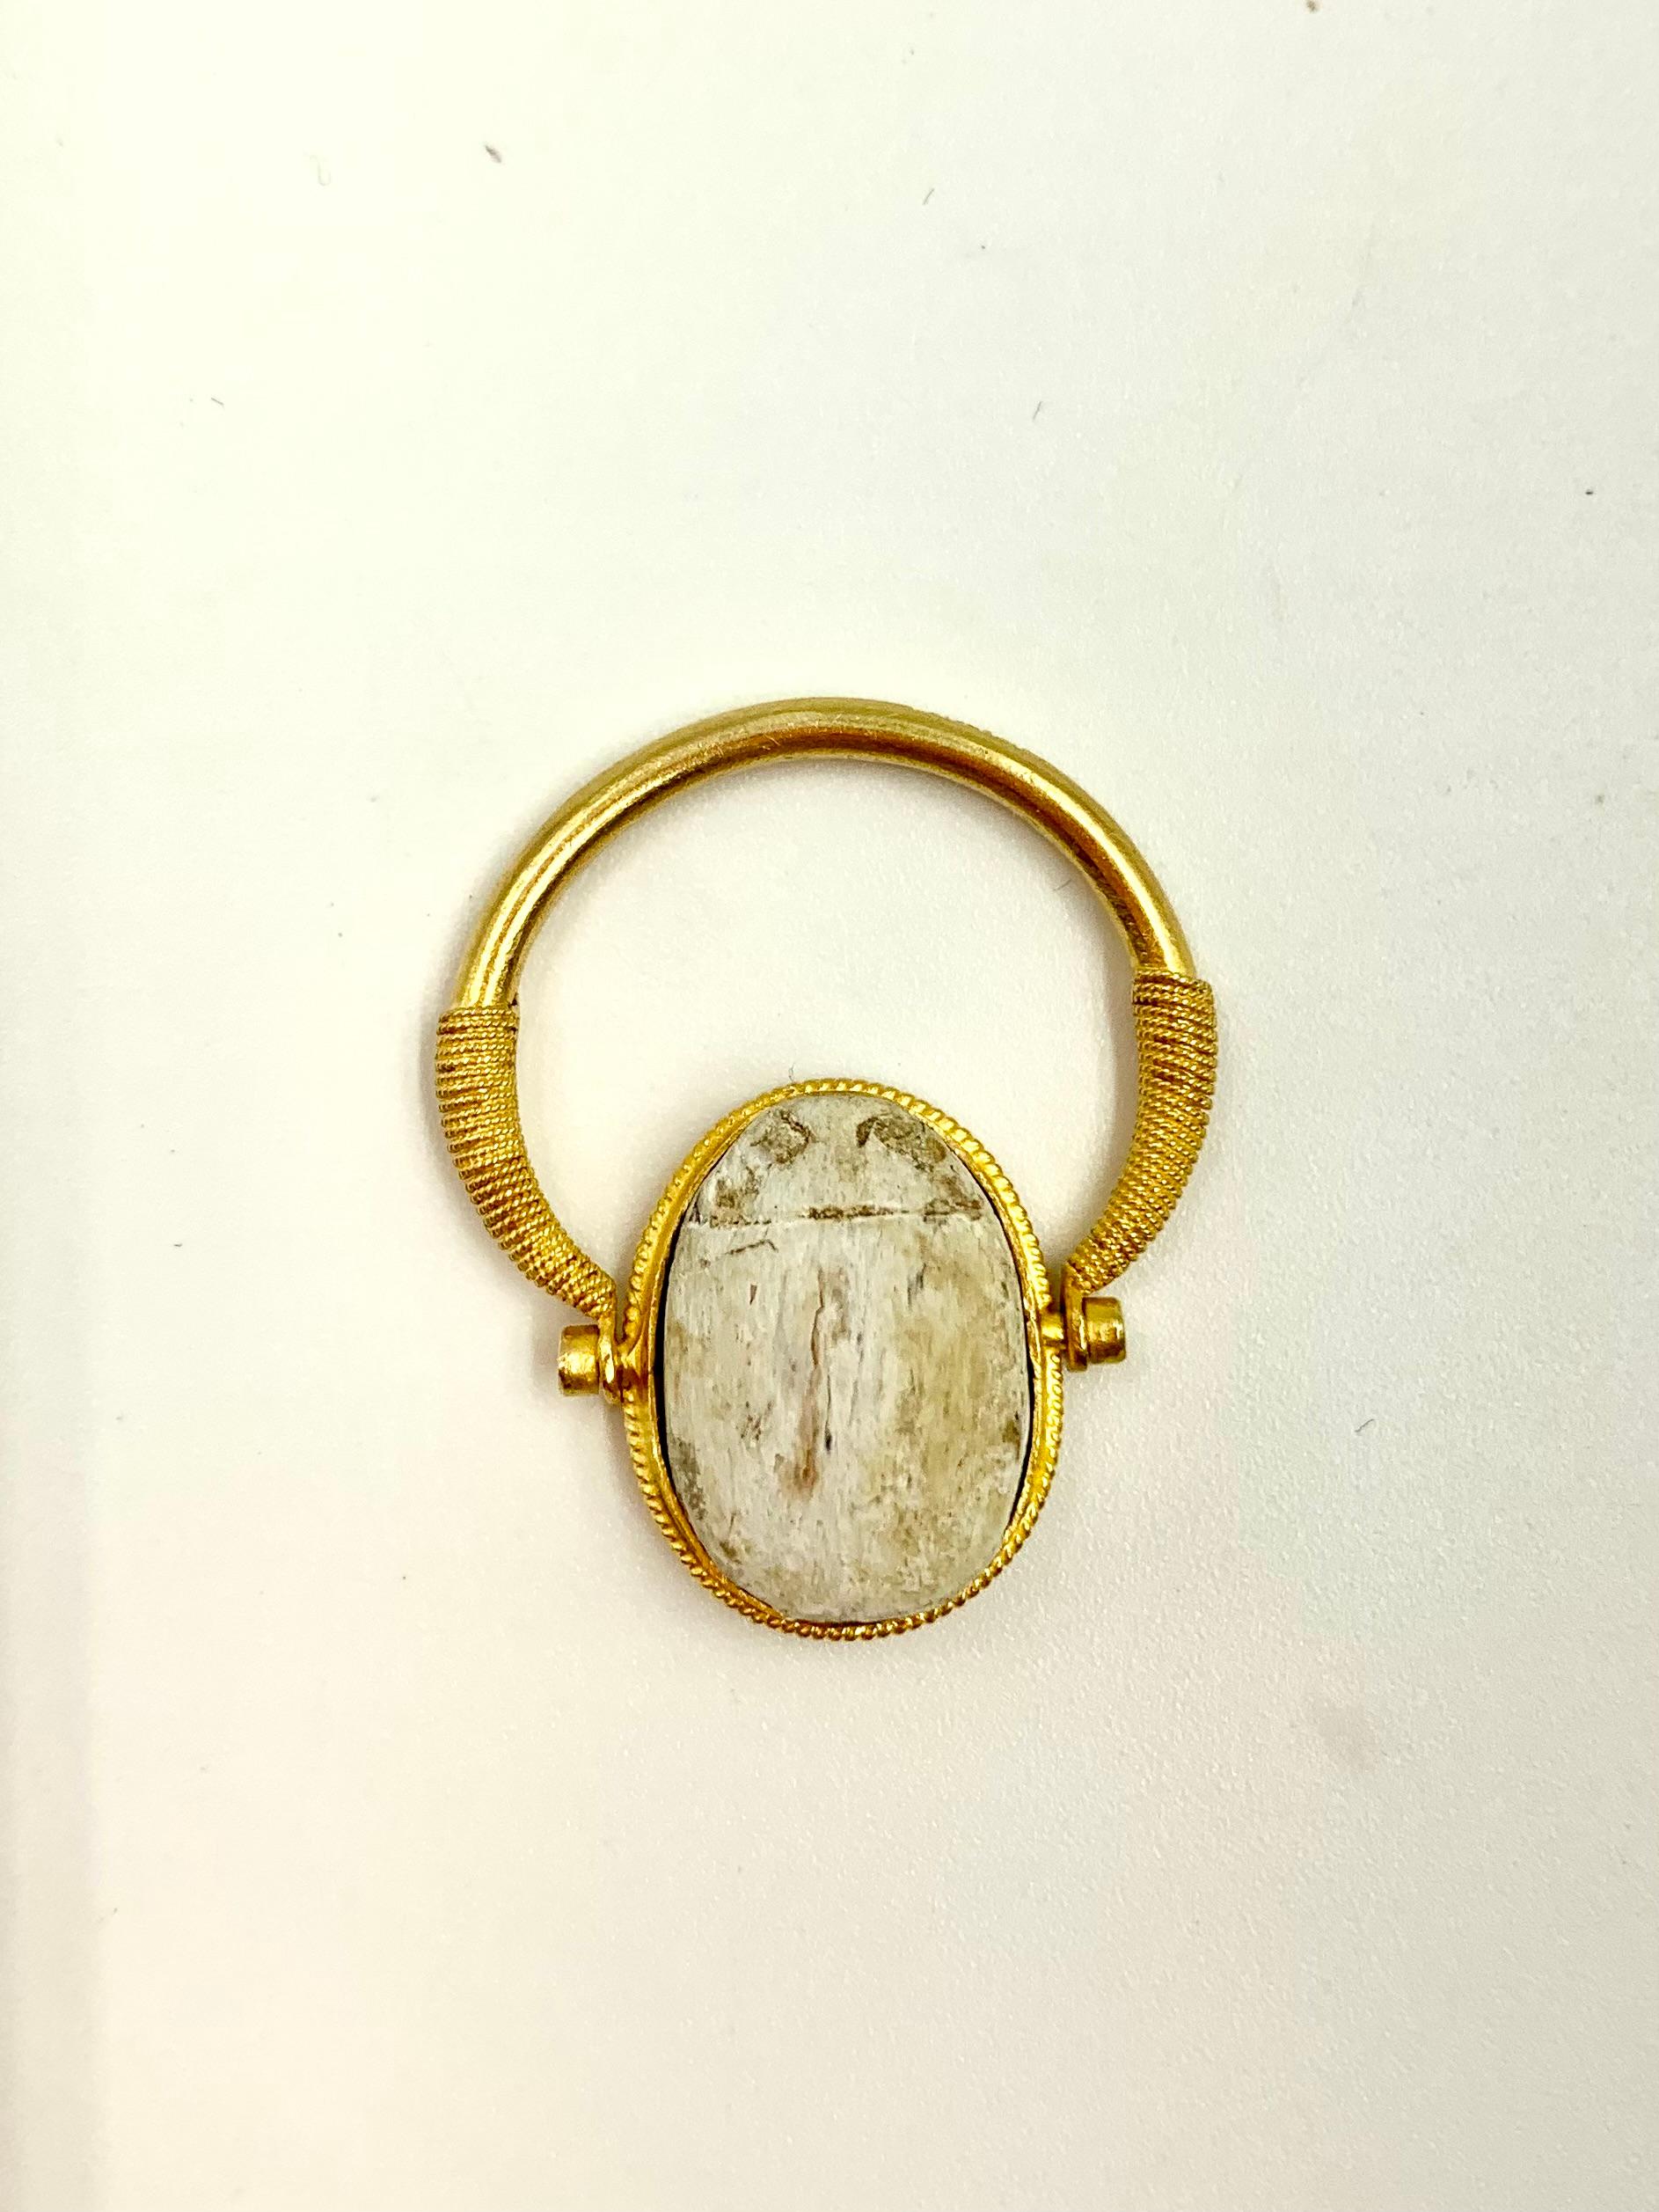 Ancient Egyptian steatite scarab amulet high carat gold swivel signet ring
The Scarab ring design, also called a Scaraboid Seal, was developed as an amulet/signet ring with the scarab symbolizing  immortality, transformation and protection.